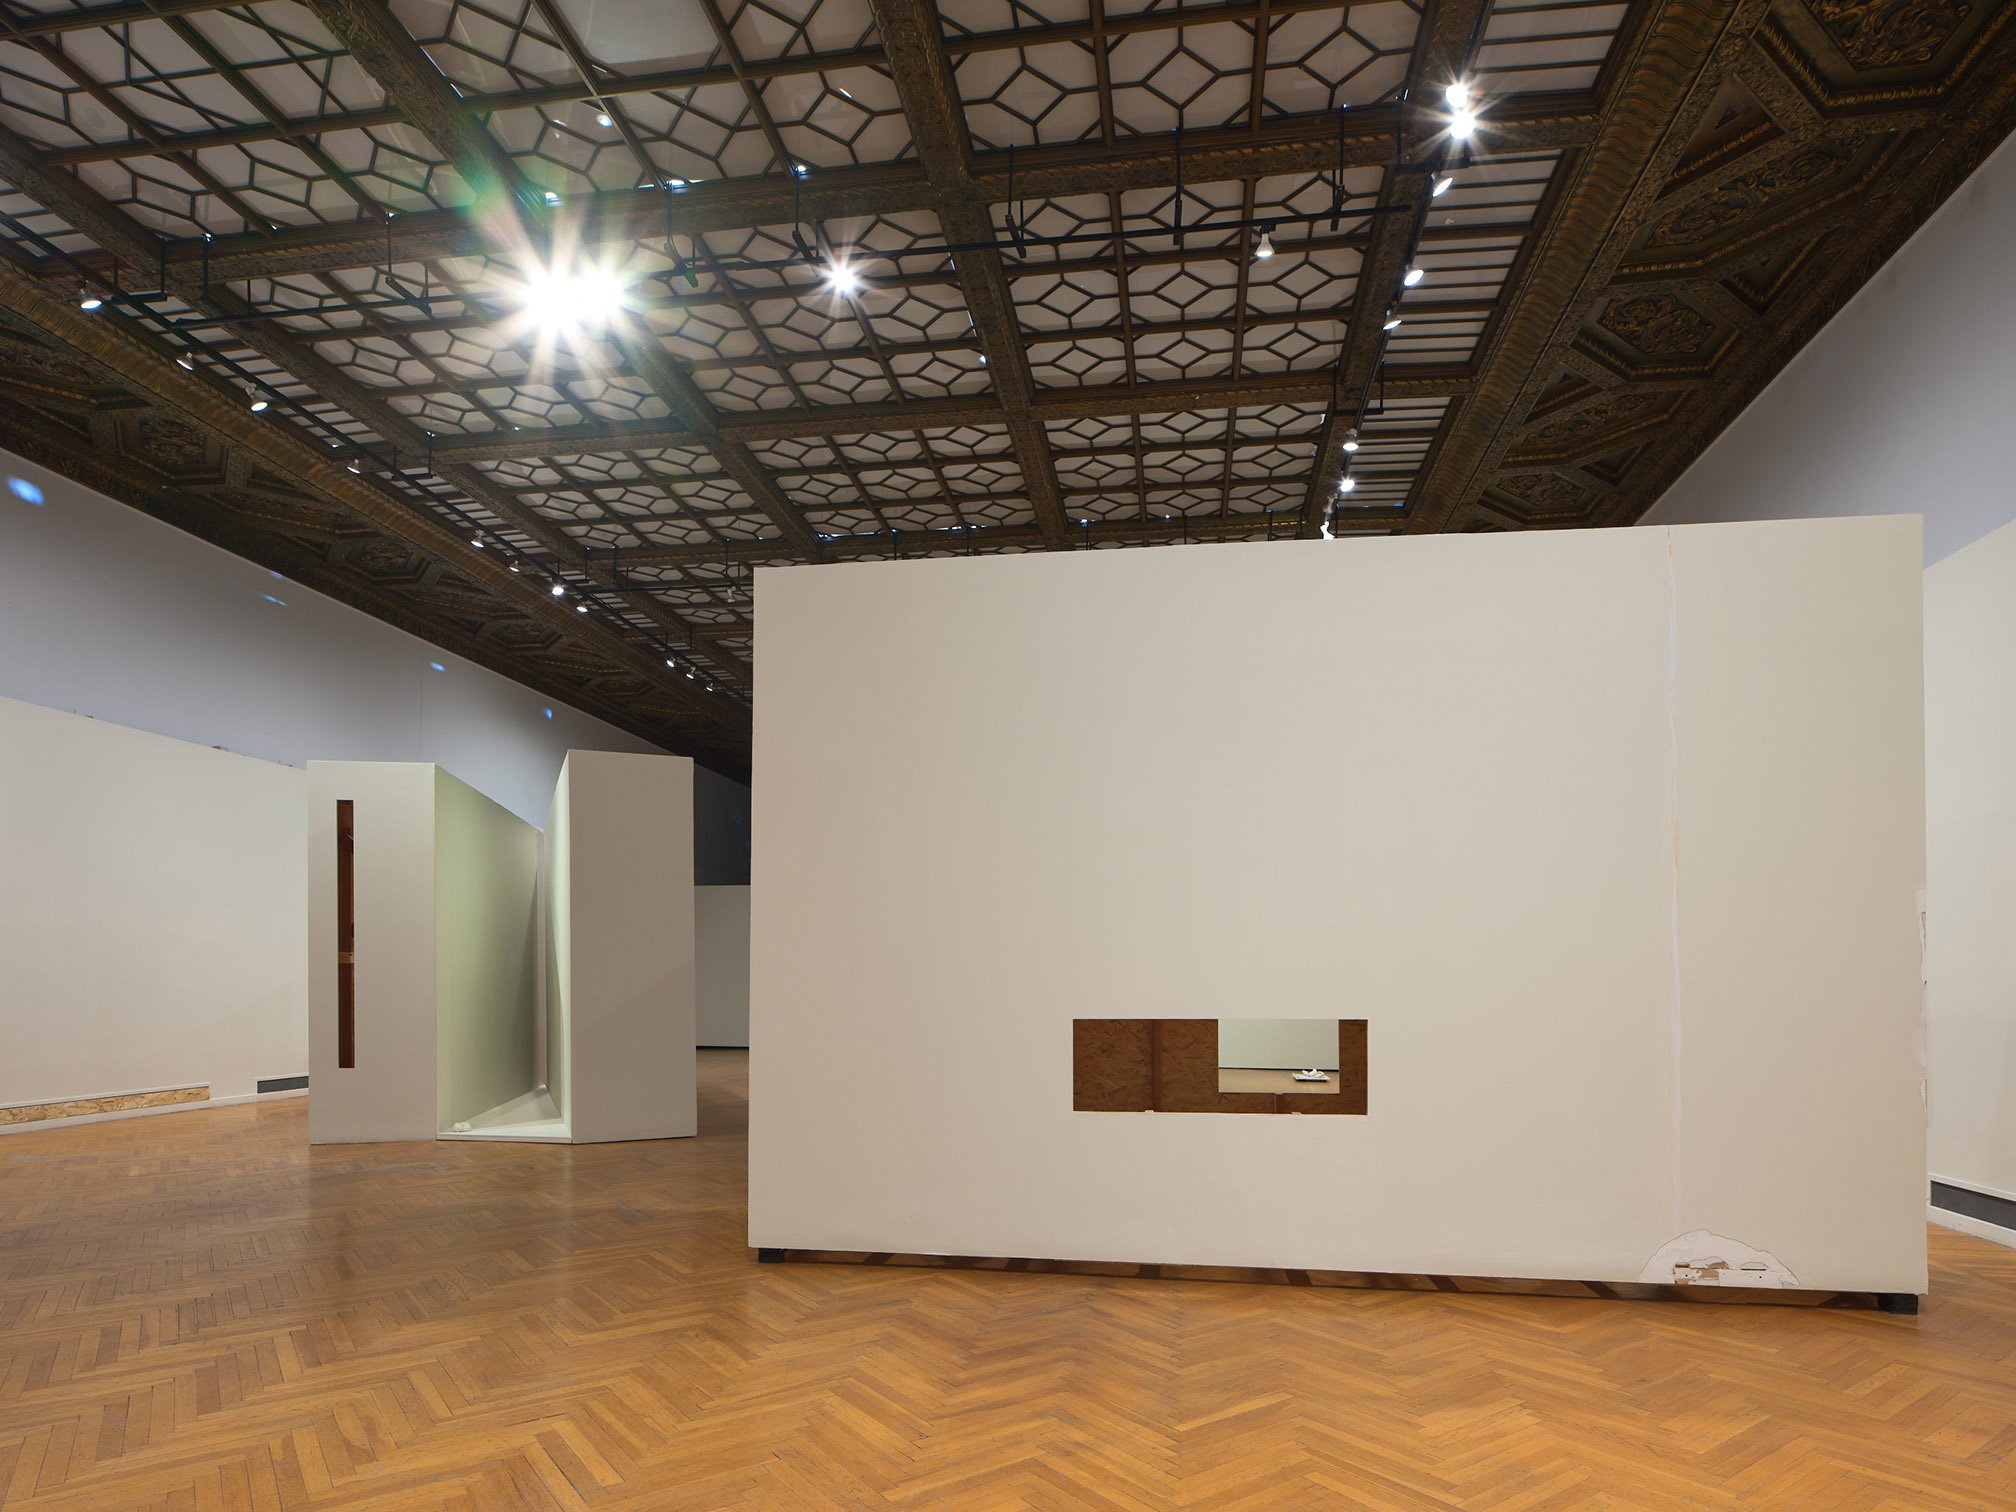   Into The Matter , exhibition view, 2018, altered moveable museum walls. Photo credit: Phil Bond Photography 